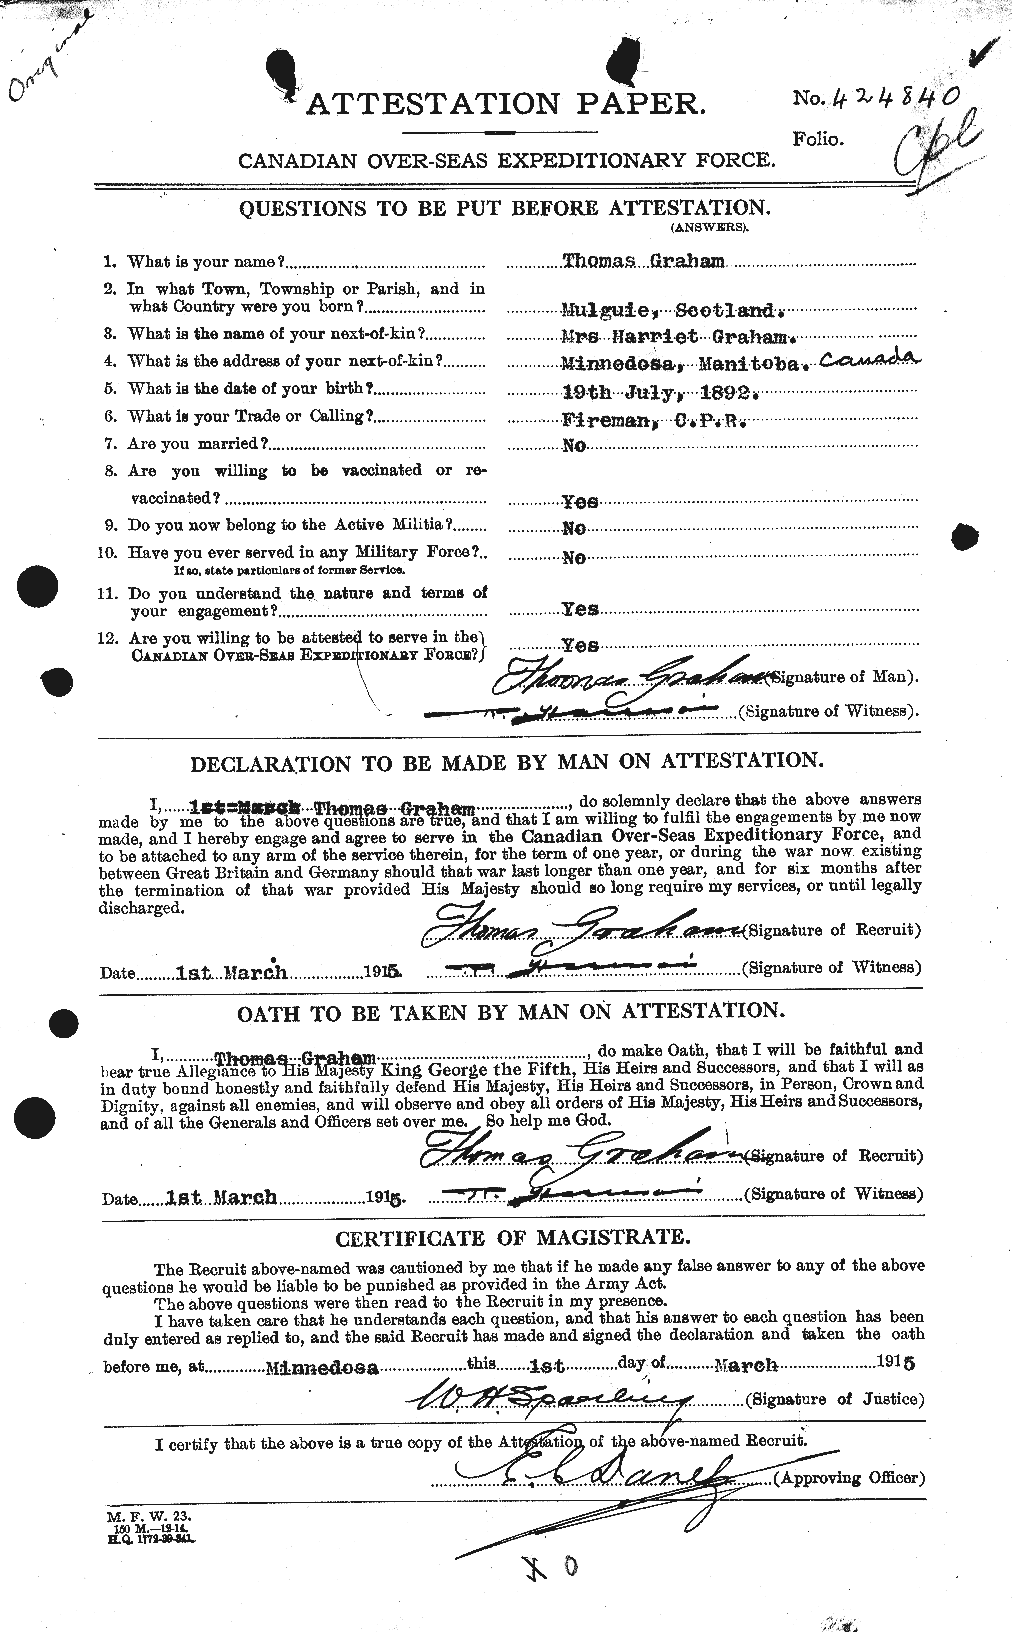 Personnel Records of the First World War - CEF 359485a